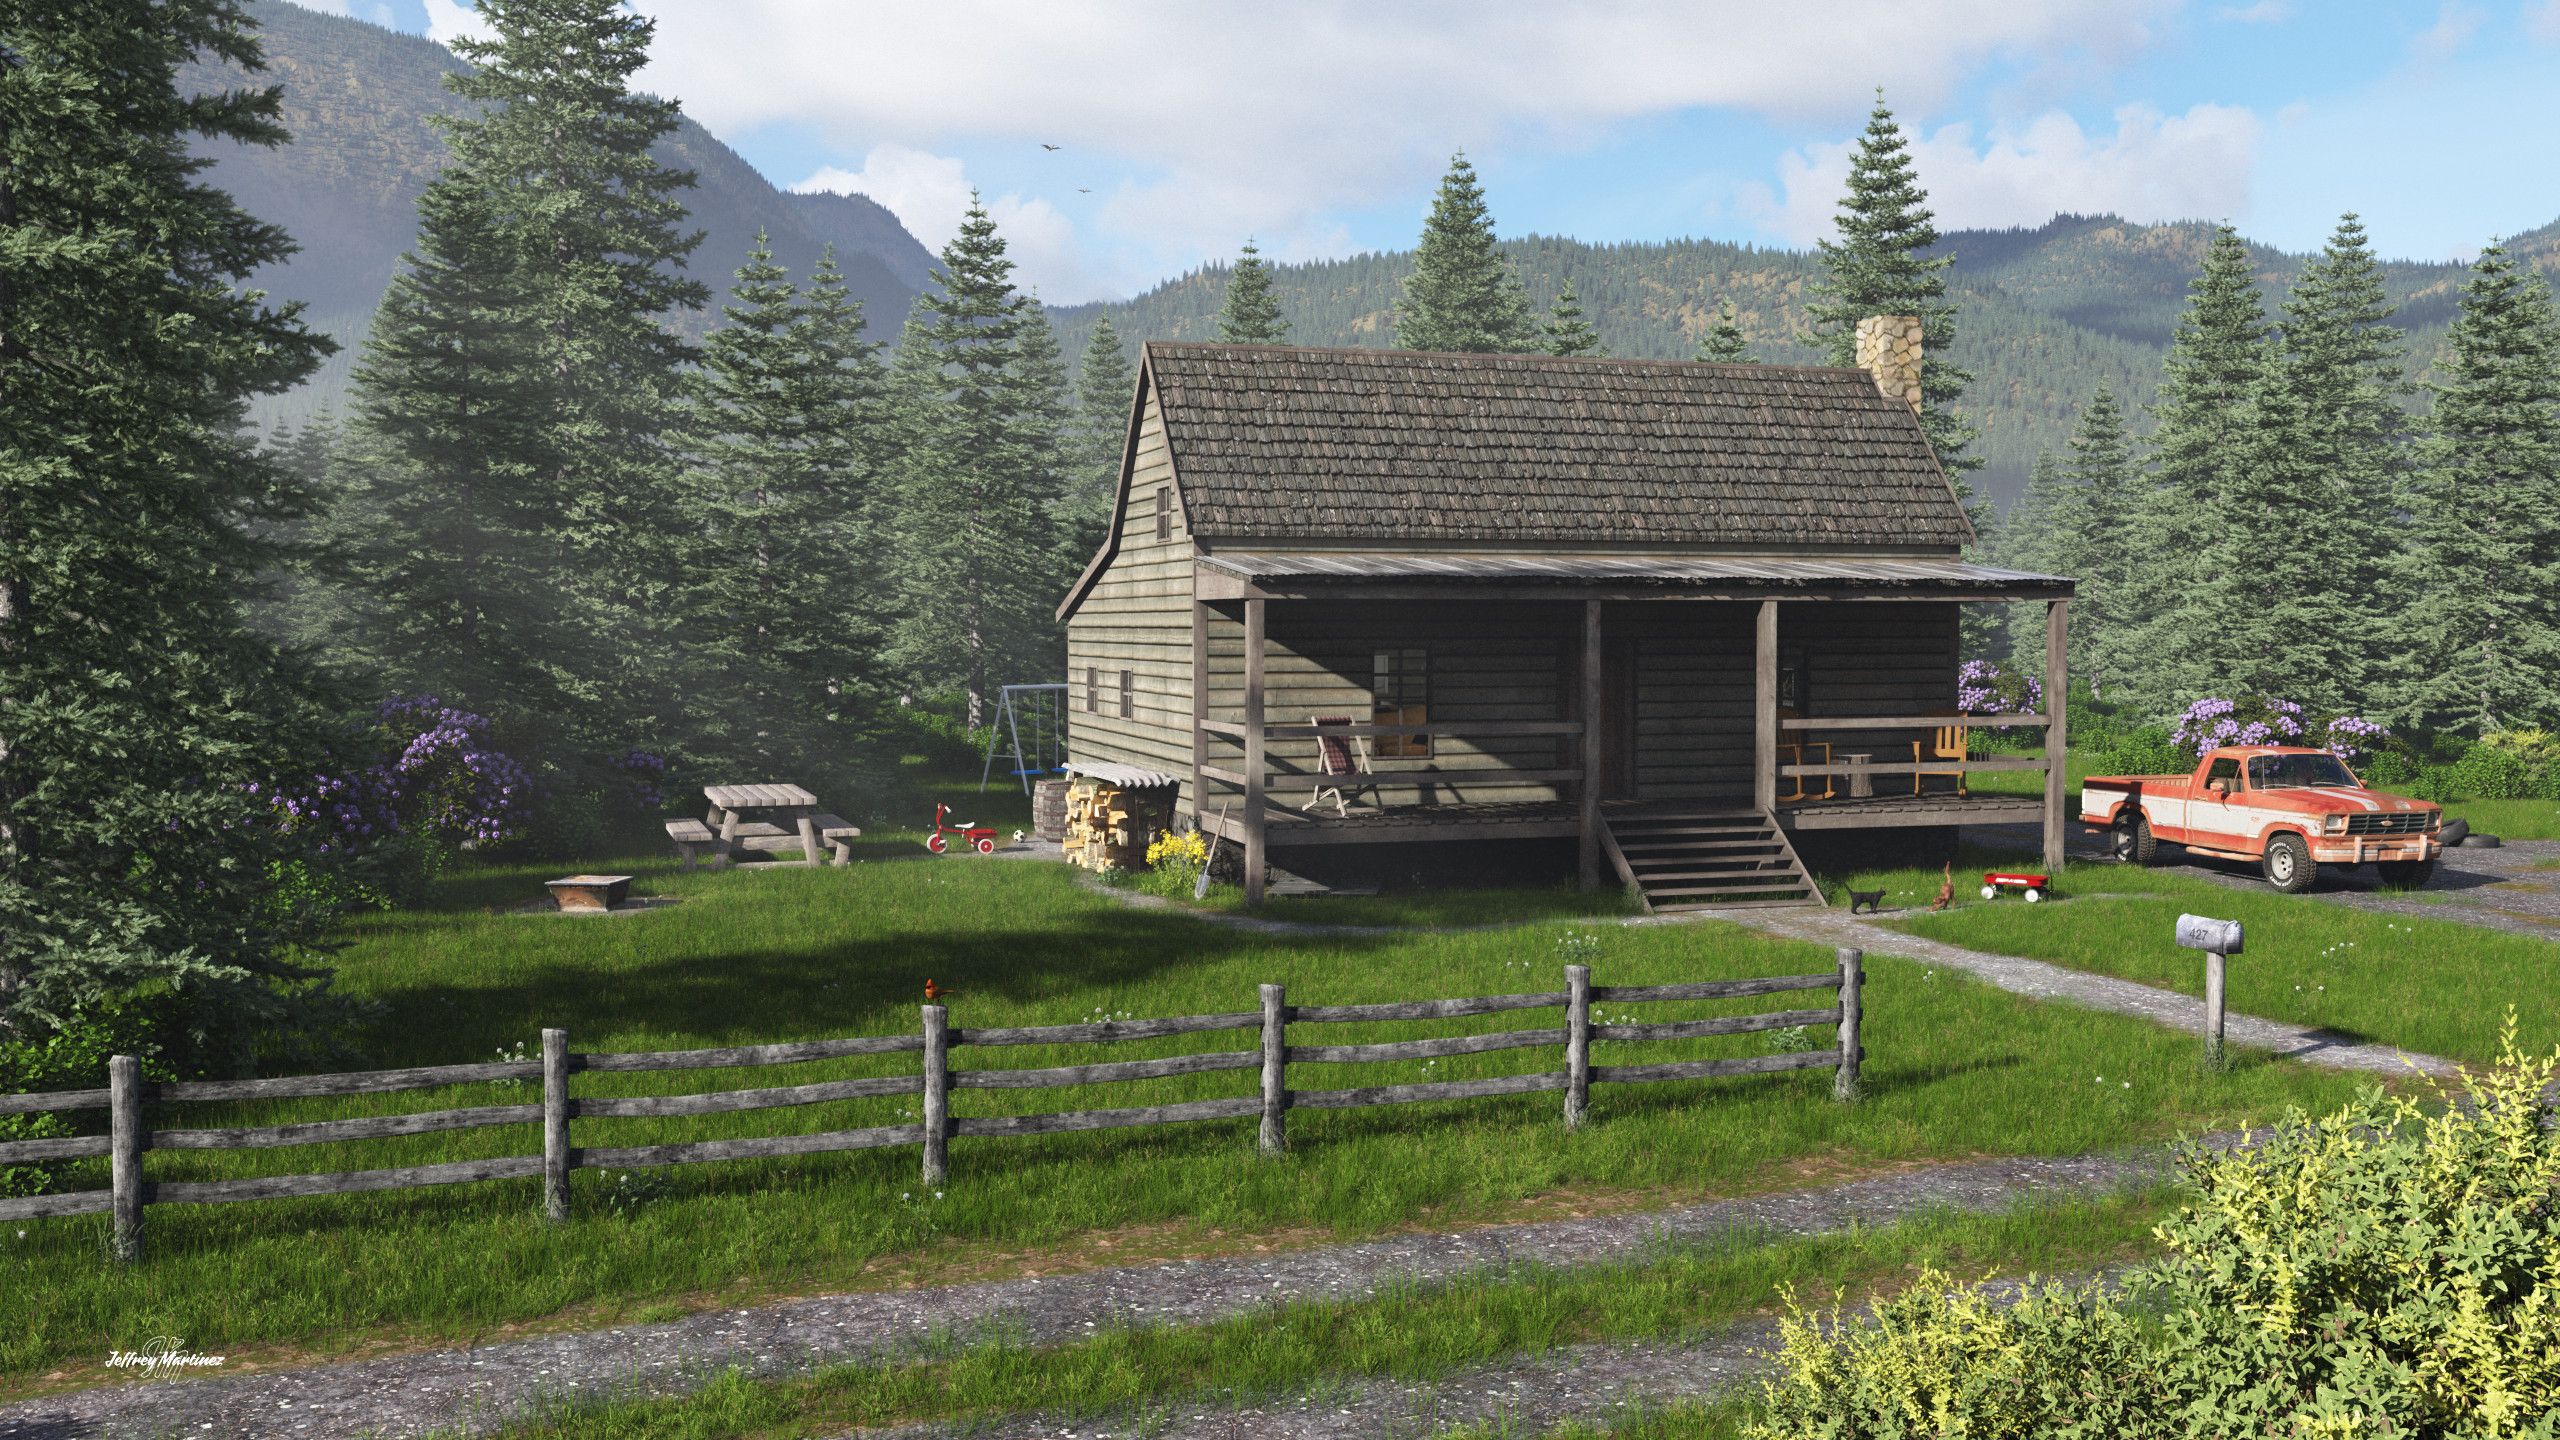 Country Cabin
20231118TG